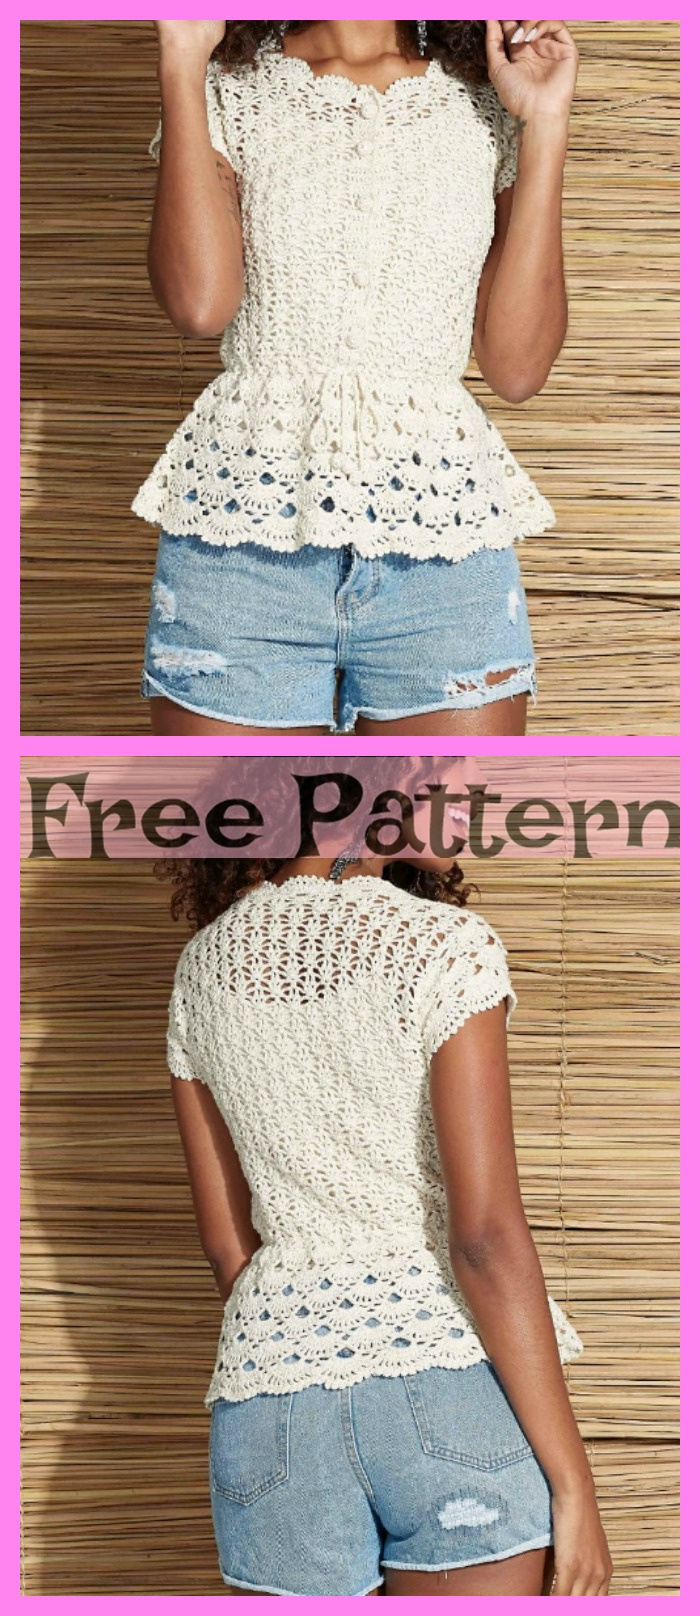 5 Most Beautiful Lace Tops - Free Pattern - DIY 4 EVER